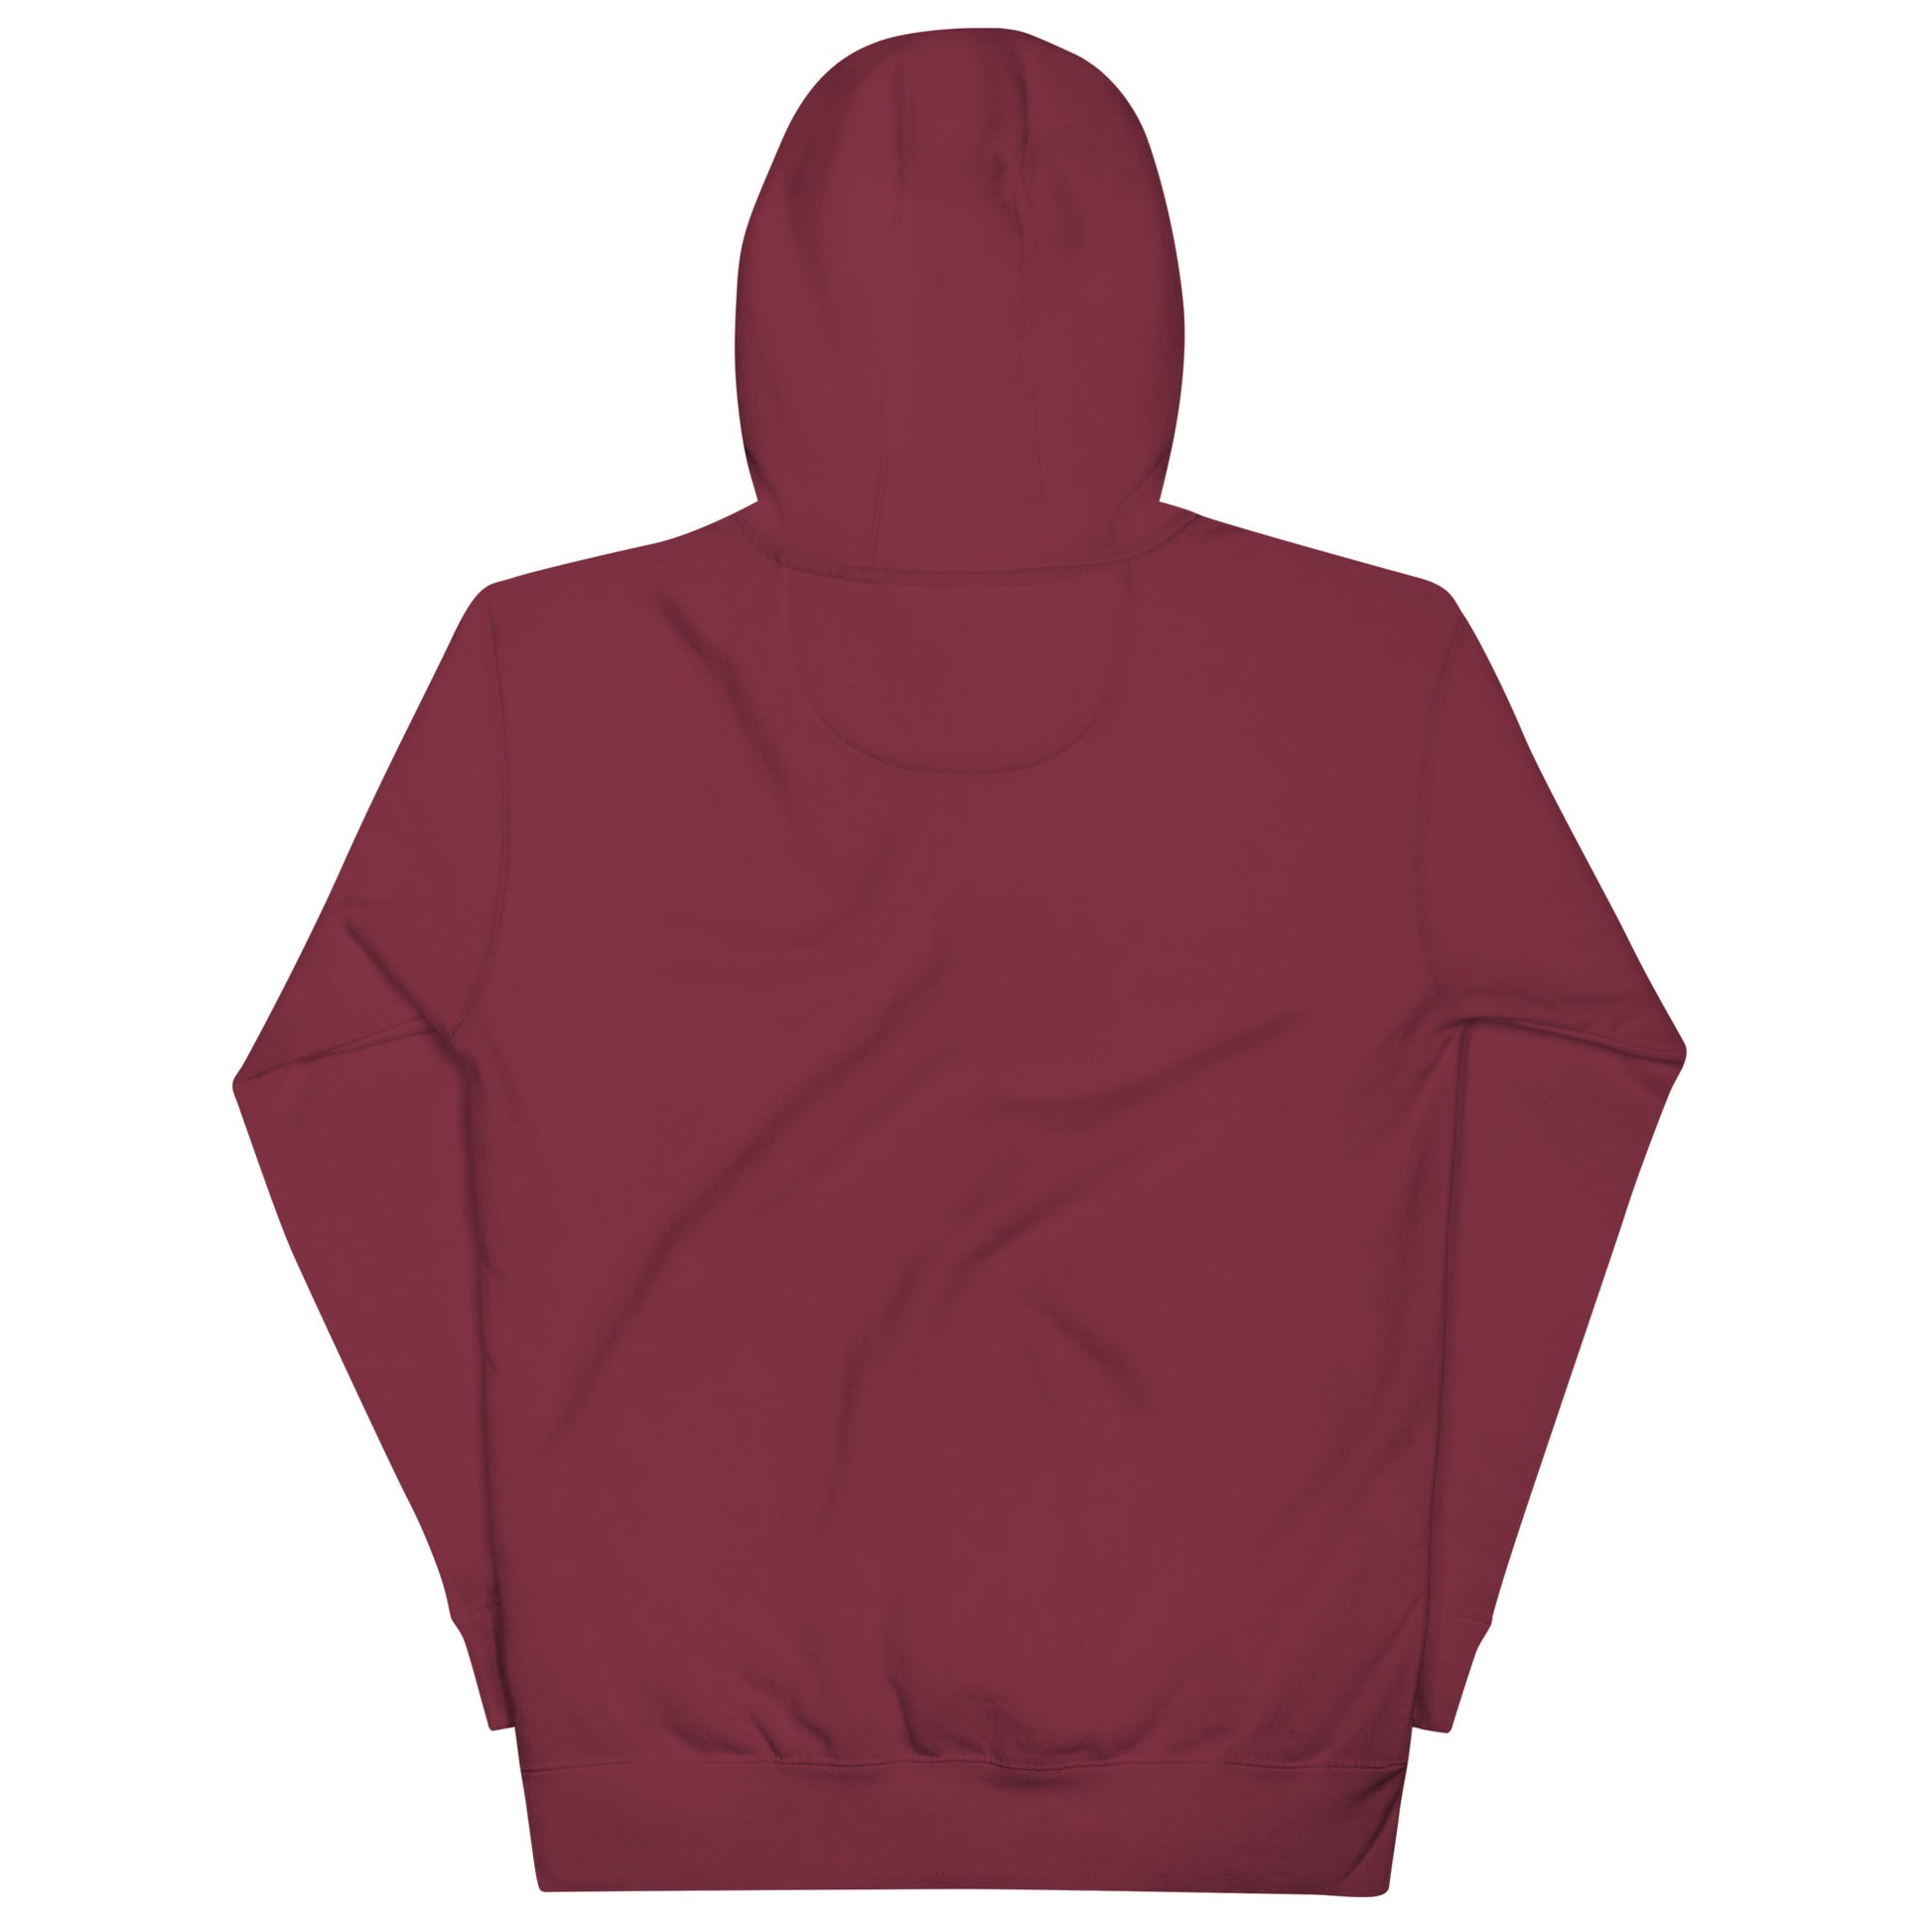 back of hoodie Leonardo maroon by B.Different Clothing independent streetwear brand inspired by street art graffiti